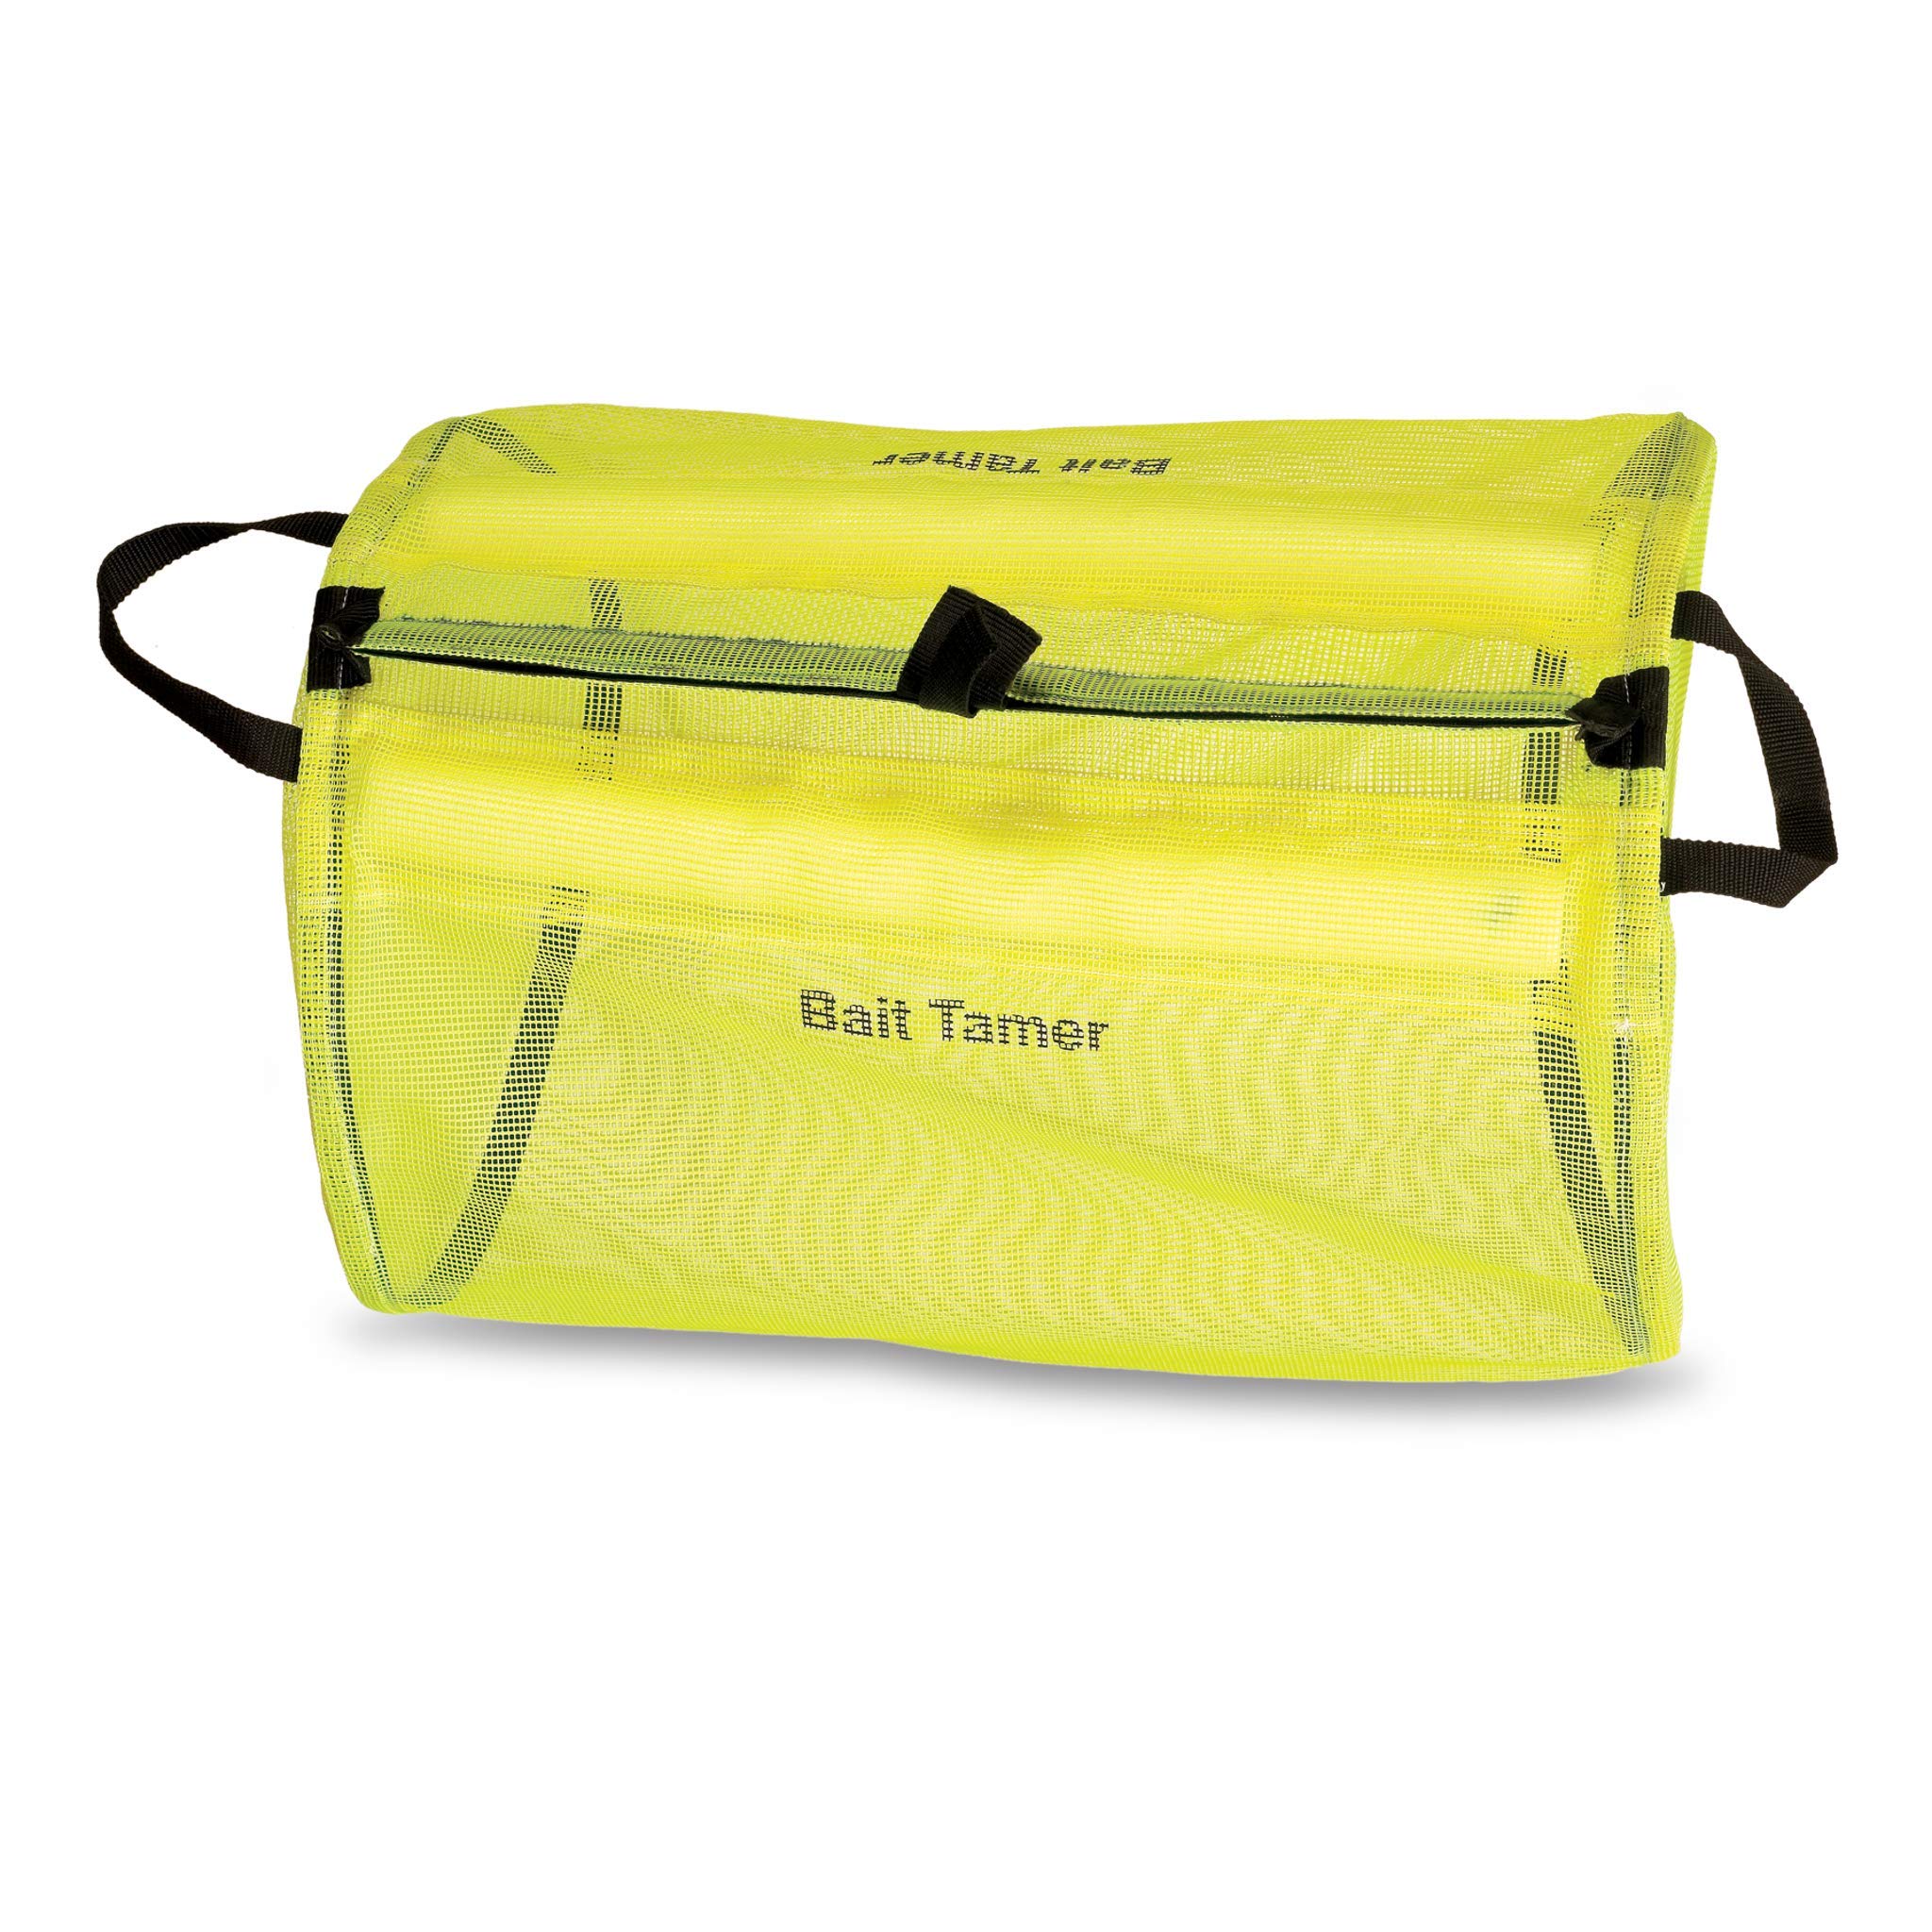 Lindy Bait Tamer Fishing Bait Bag - Keeps Live Bait Healthy and